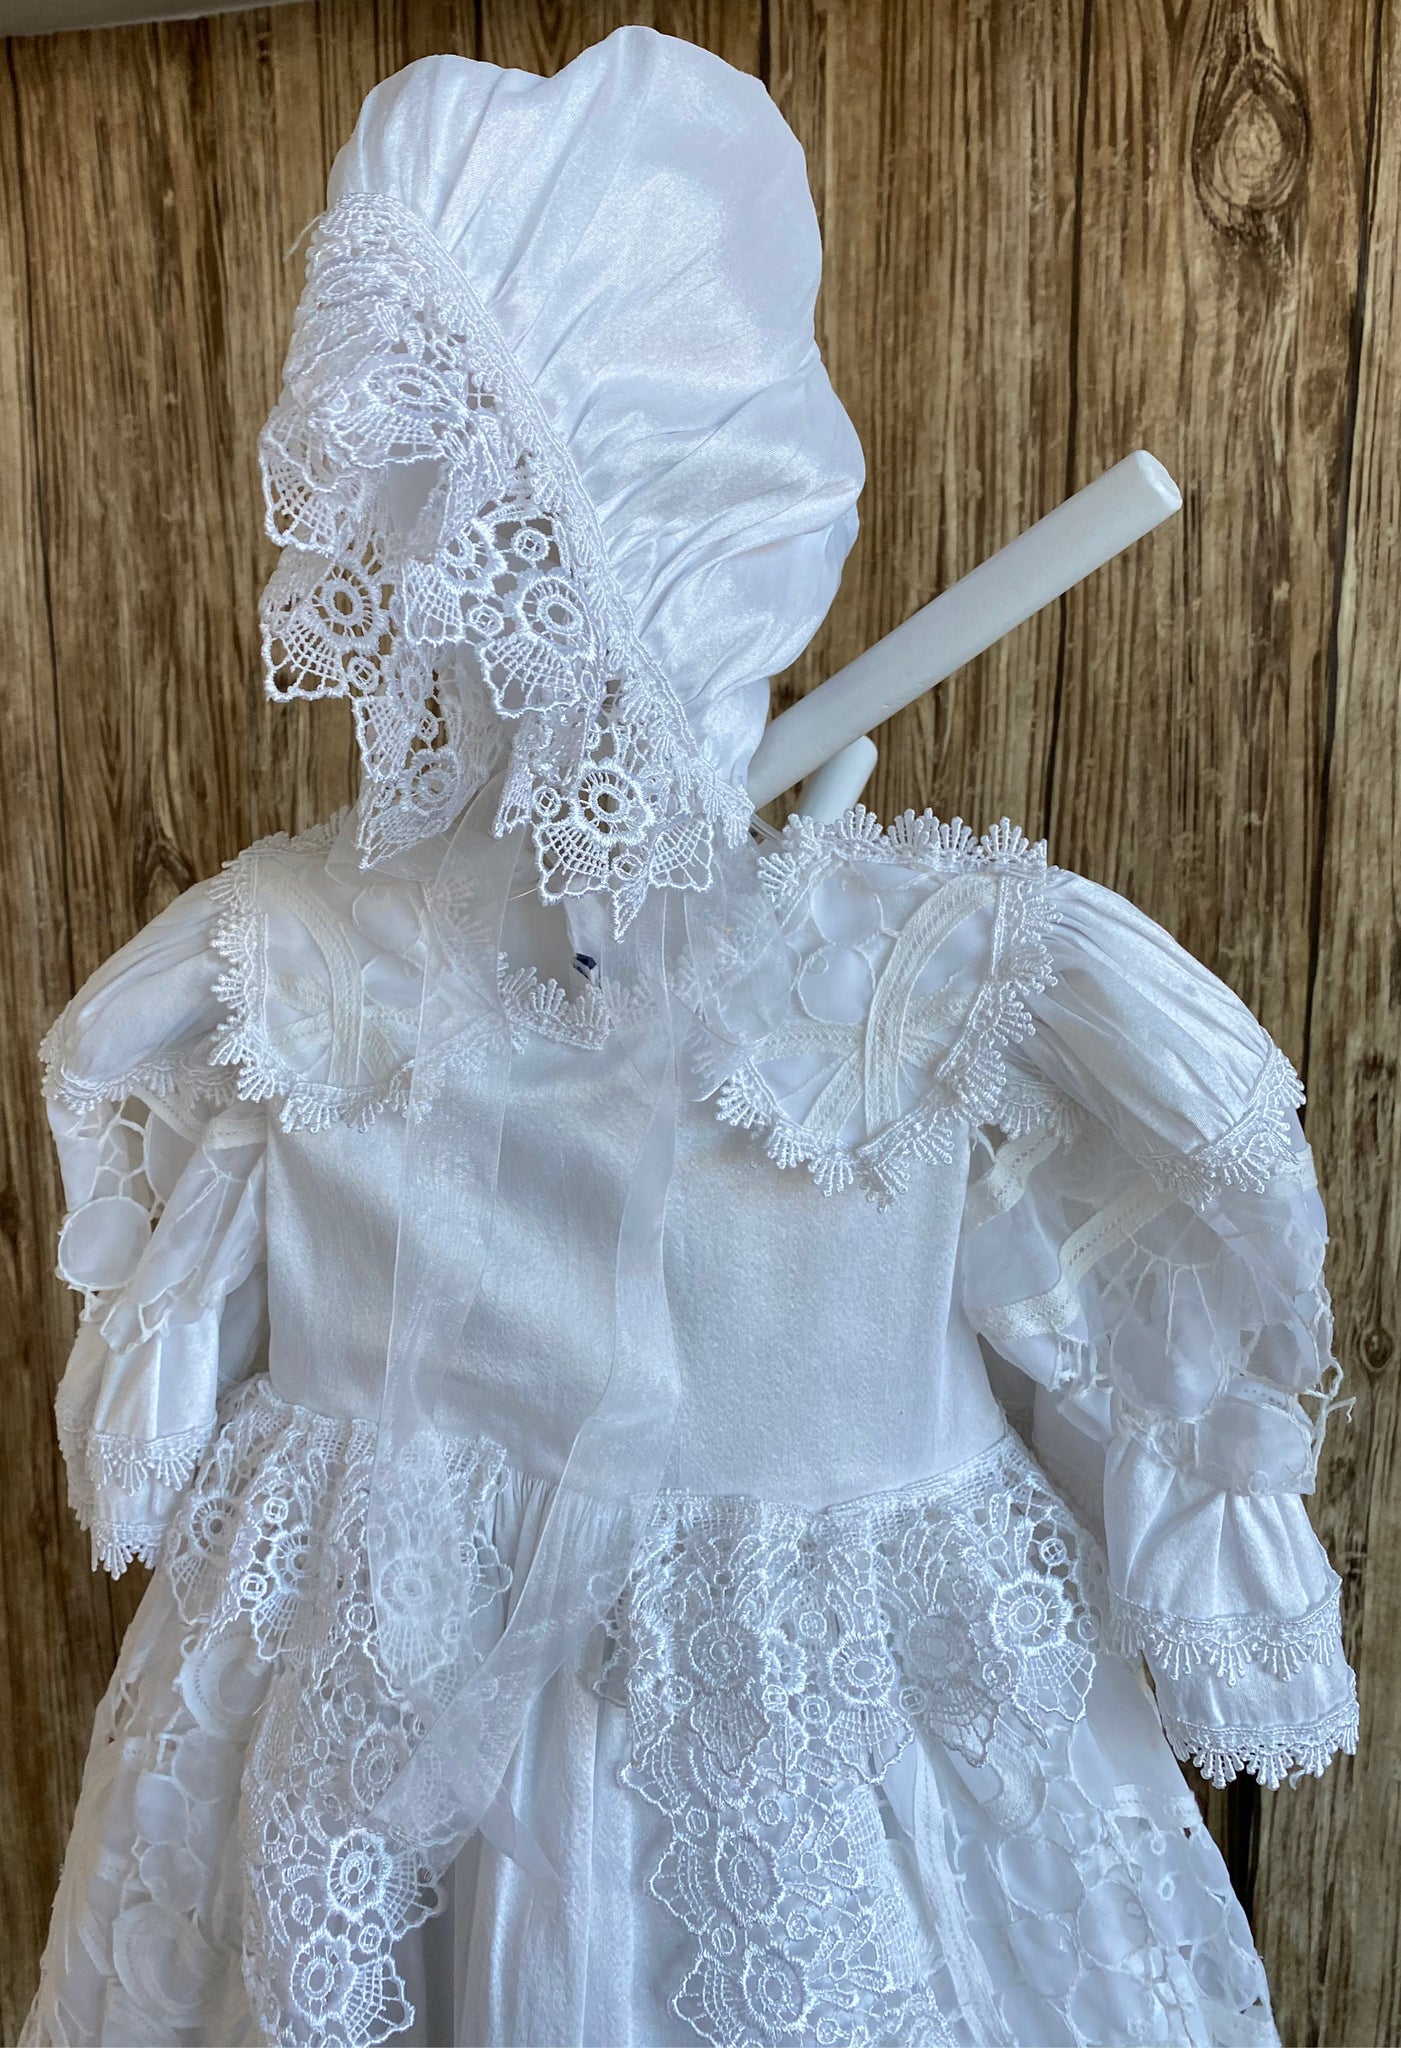 This a beautiful, one-of-a-kind baptism gown.  A lovely gown for a precious child.  White, size 12M Satin bodice with lace collar Beautiful lace trim edging collar and sleeves Satin puff sleeve with lace patch  Satin skirting with lace overlay  Thick embroidered lace ribboning around overlay and skirt edge Lovely satin bonnet with thick embroidered lace brim Mesh ribbon closure on bonnet